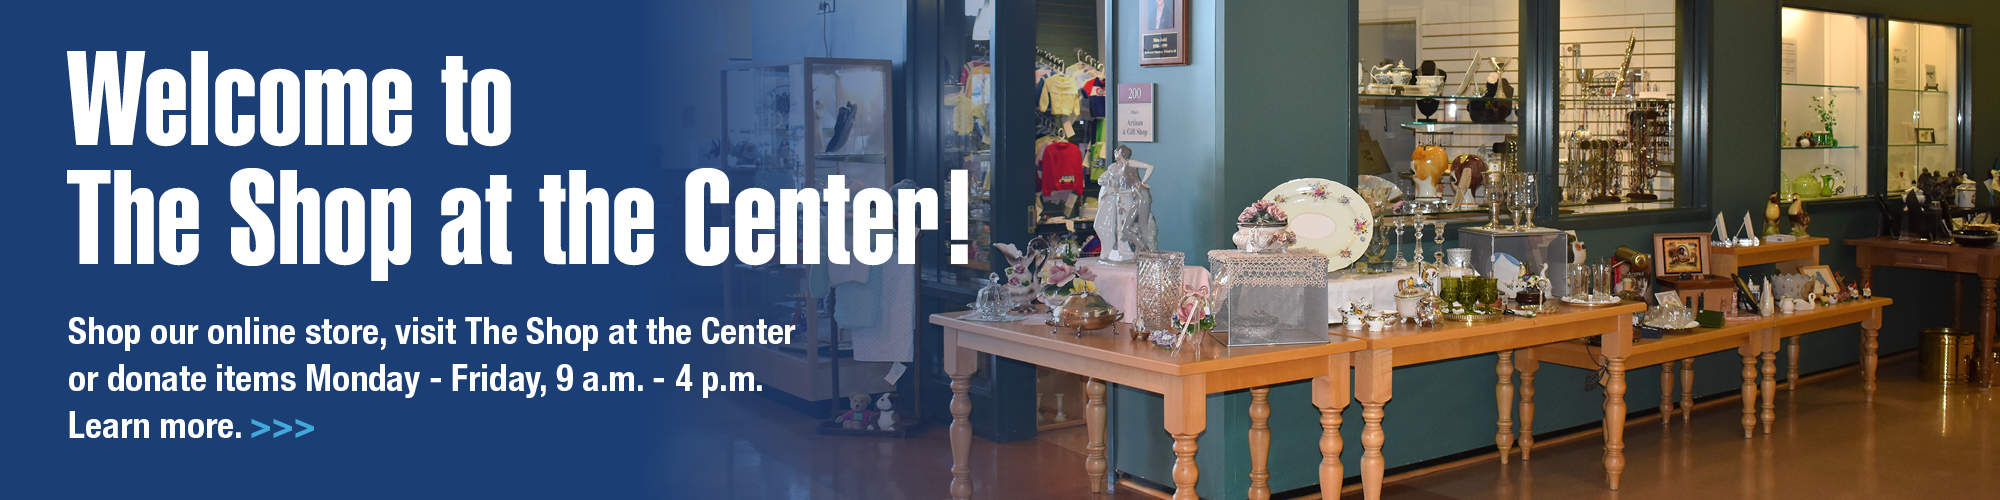 Welcome to the shop at the center!